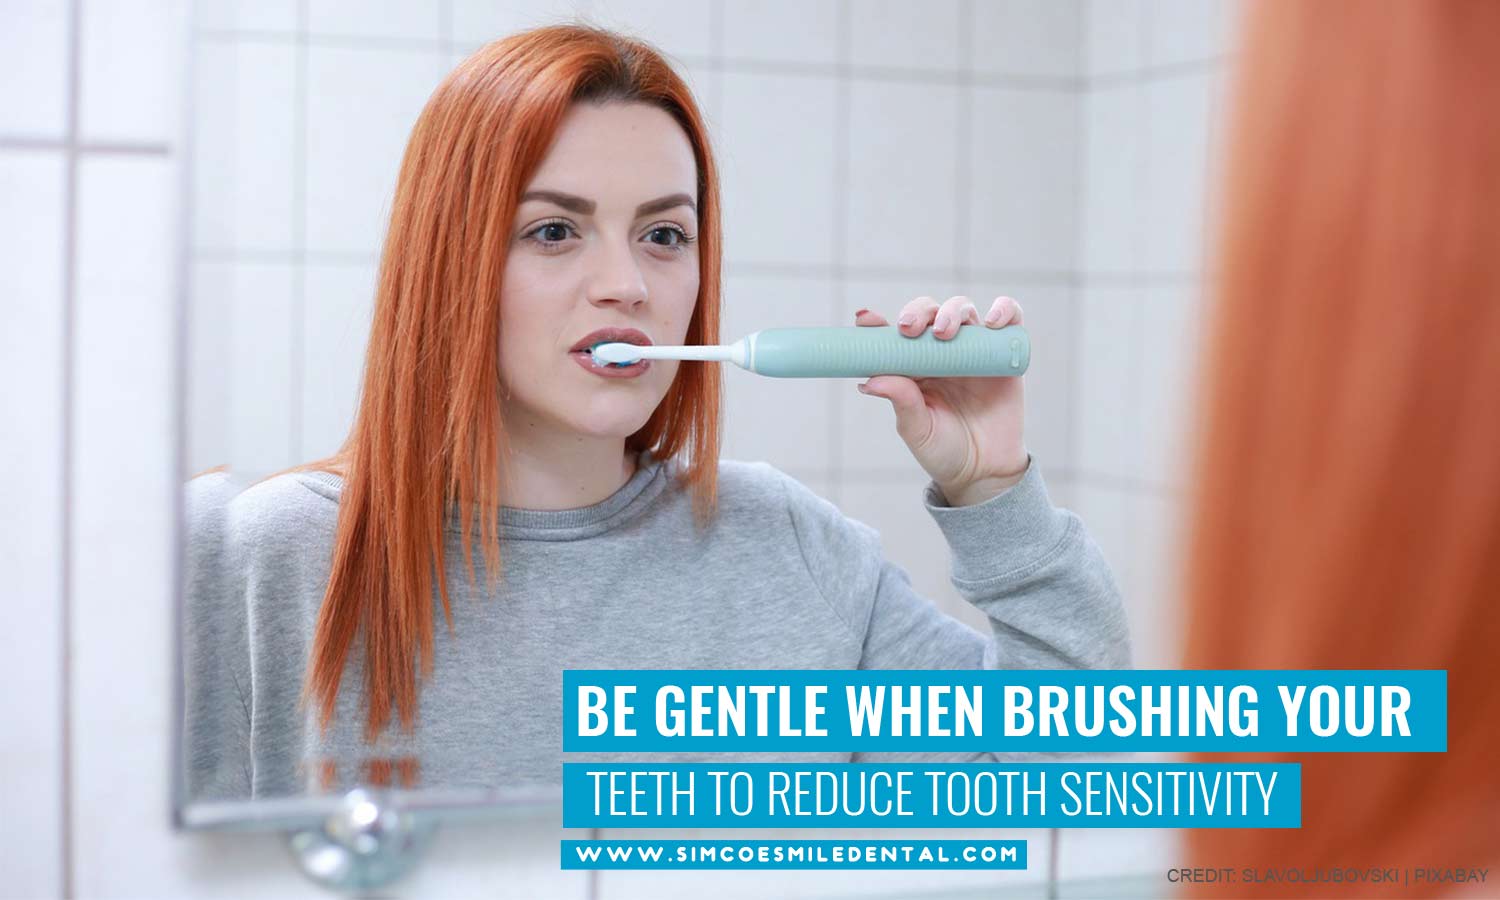 Be gentle when brushing your teeth to reduce tooth sensitivity